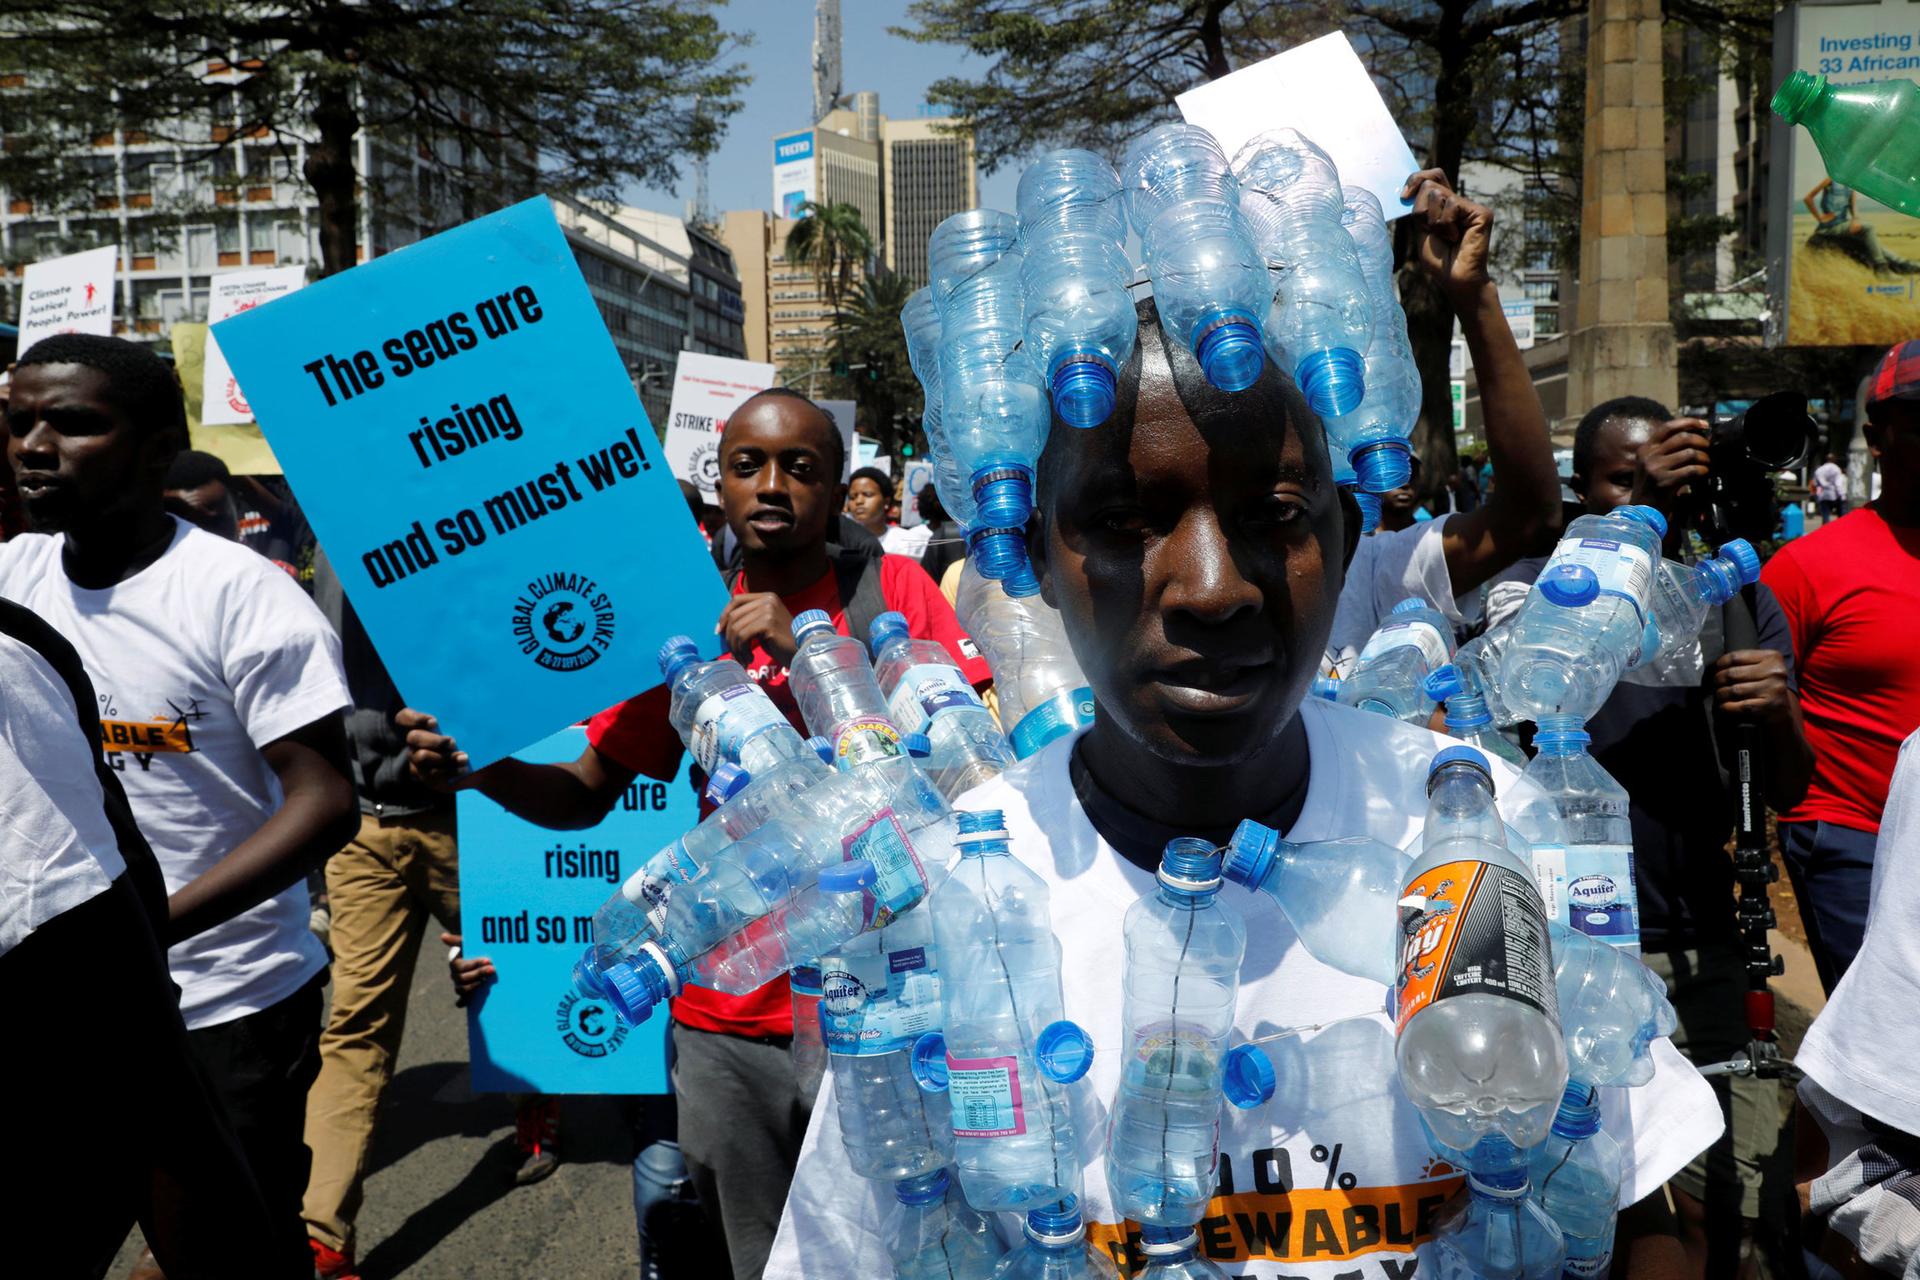 A man is shown with several empty plastic bottles attached to his shirt.